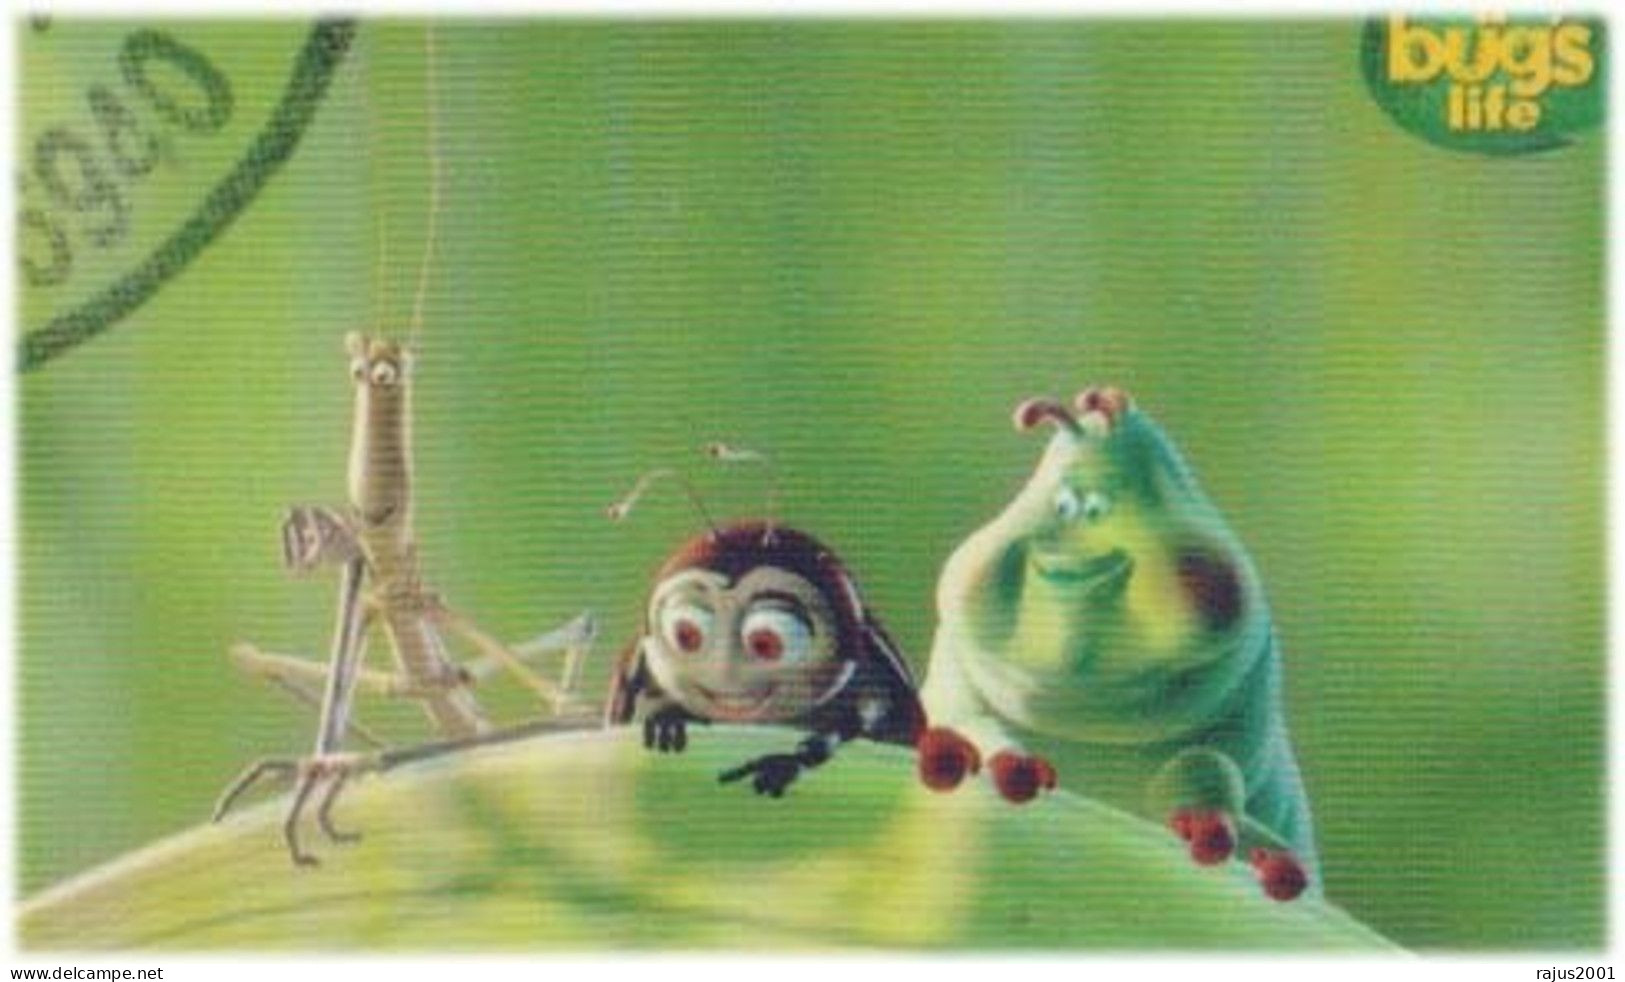 Disney Pixar, Bug, Bugs Life, Insects, Insect, Queen Ant, Ants, Beetles, Butterfly,  Cartoon, Animal, Souvenir Sheet FDC - Mariposas